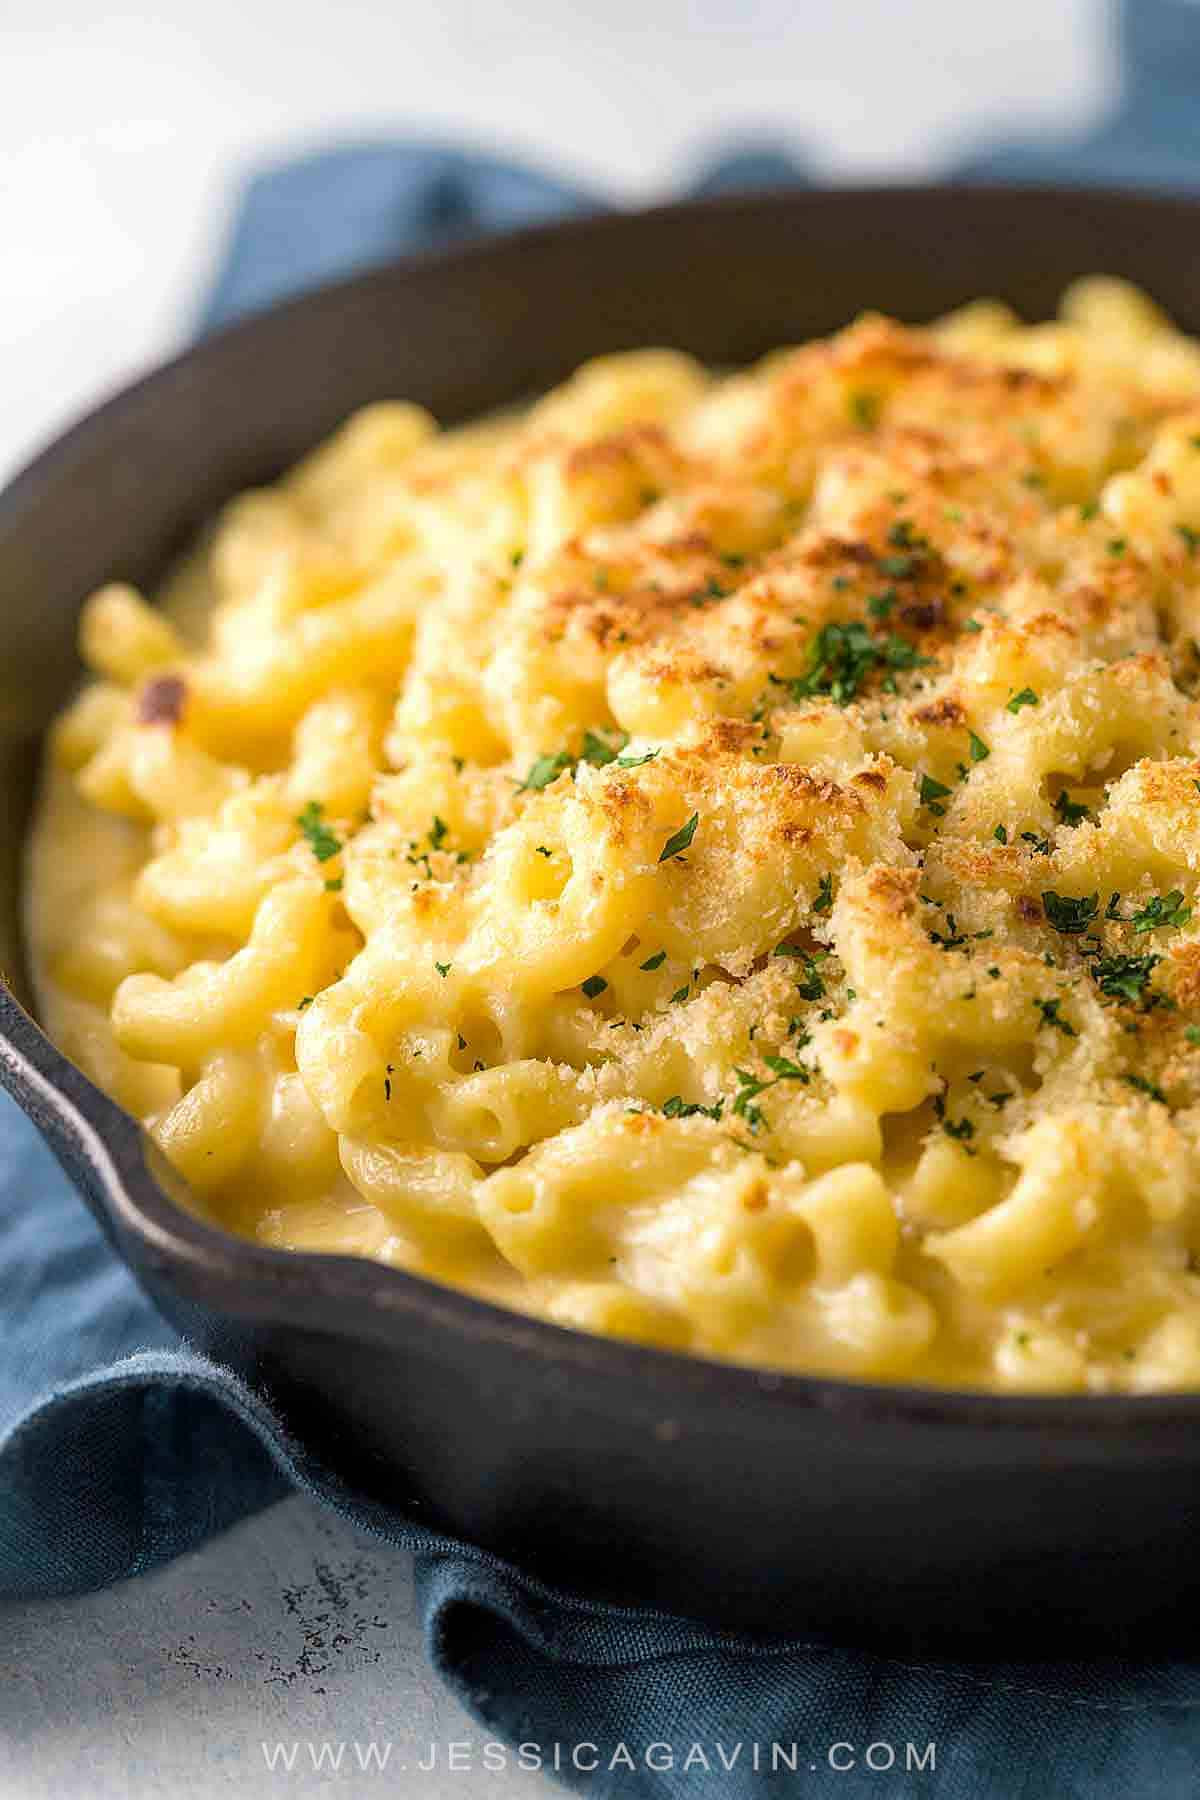 Recipe For Homemade Baked Macaroni And Cheese
 Baked Macaroni and Cheese Jessica Gavin